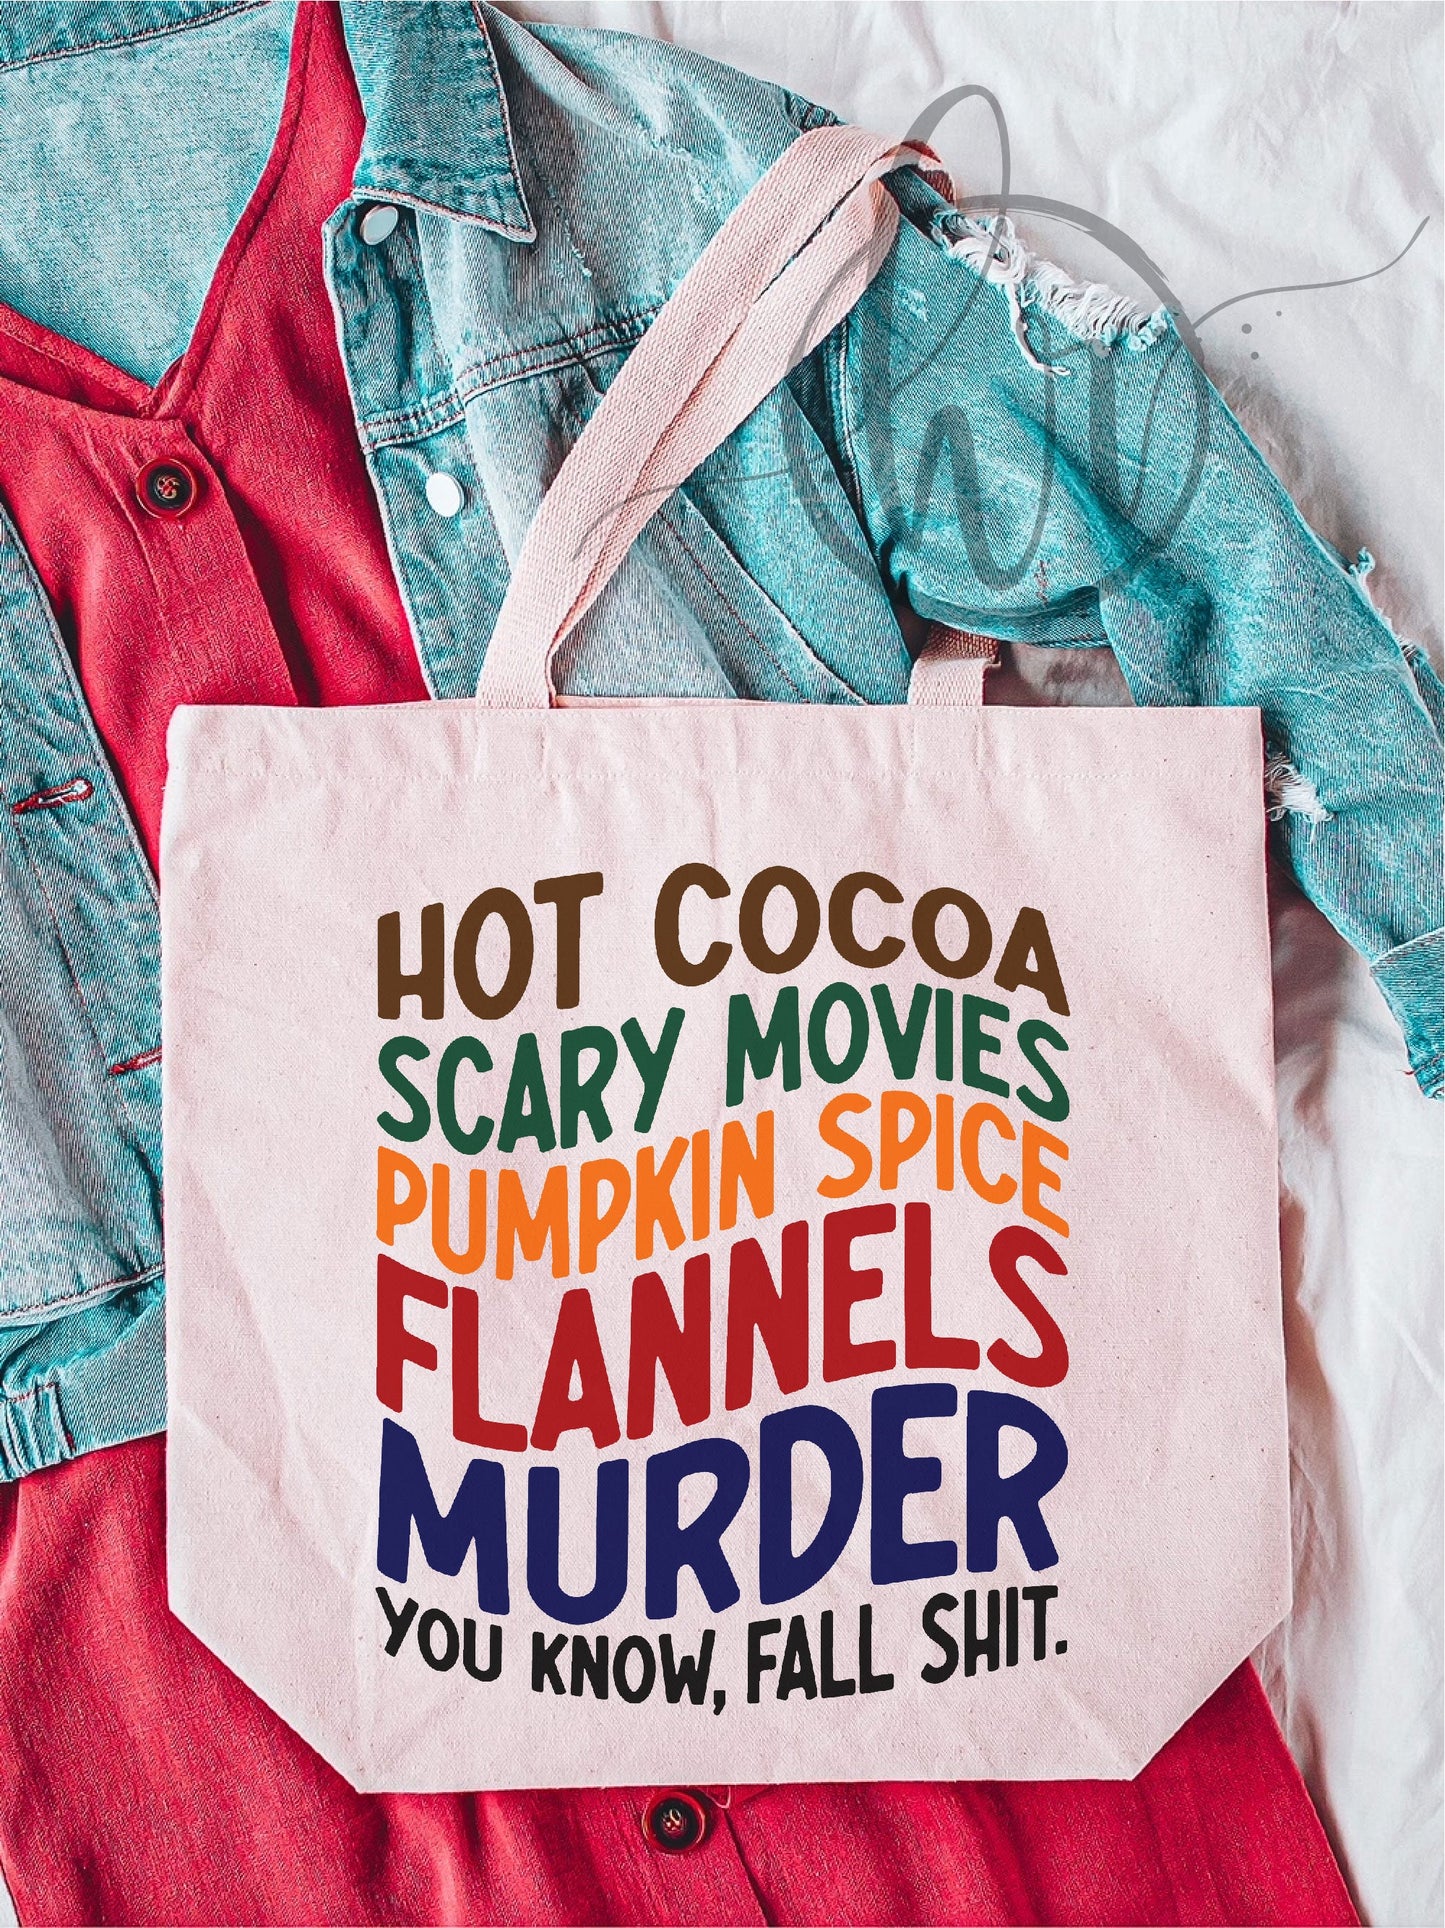 Hot Cocoa Scary Movies Pumpkin Spice Flannels Murder You know, Fall Sh--. Tote Bag